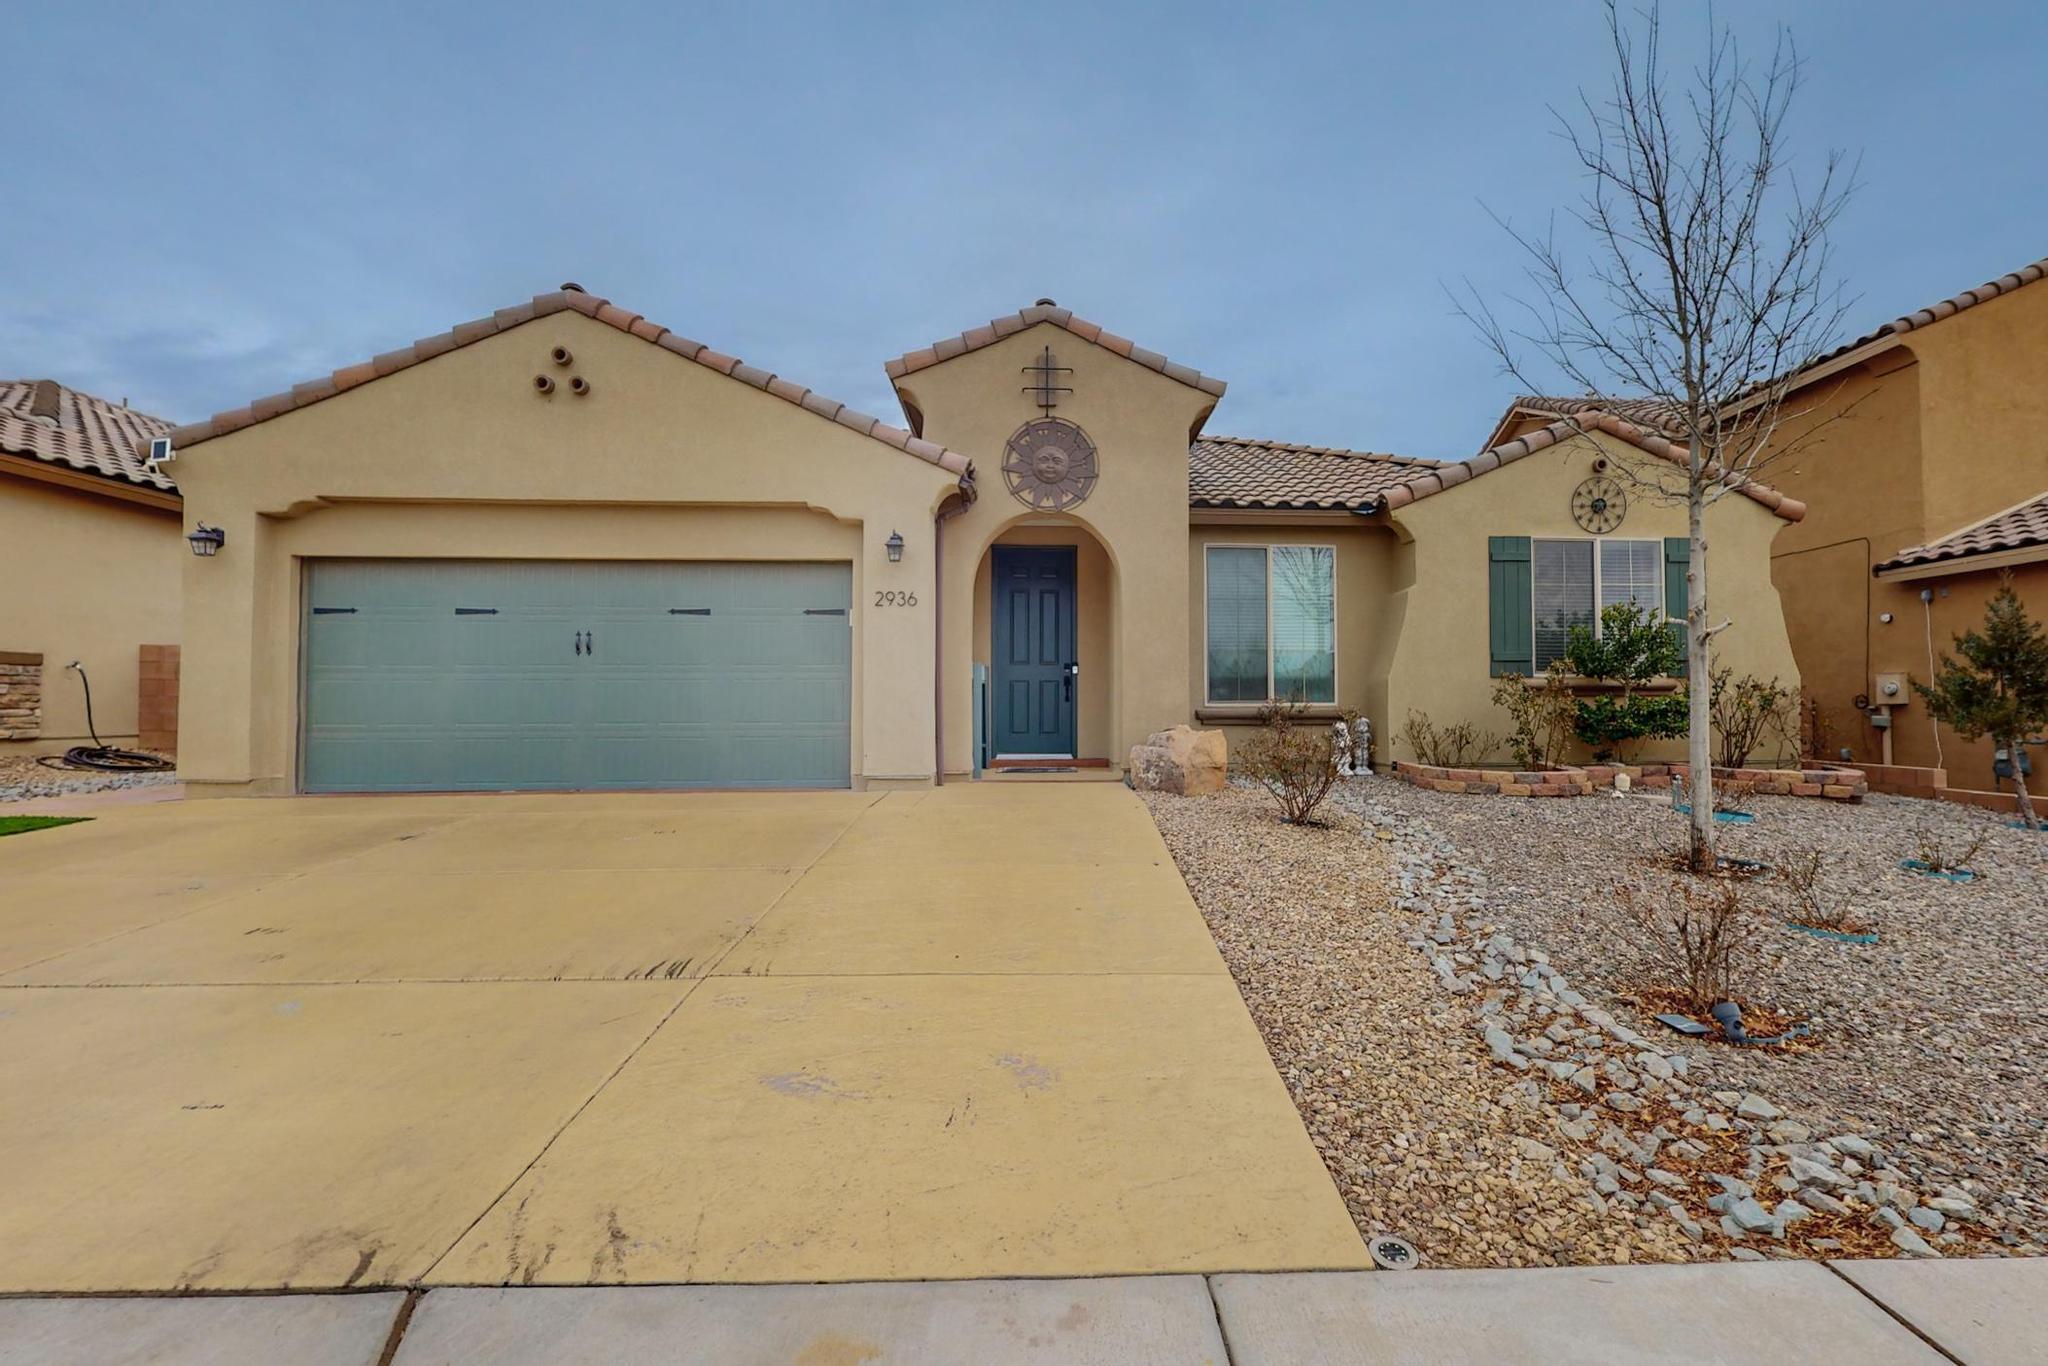 Welcome home! This beautiful Cabezon home is ready to welcome you in. With 3 bedrooms, 1 office and a den, it is an absolute gem. Come by and see it yourself!